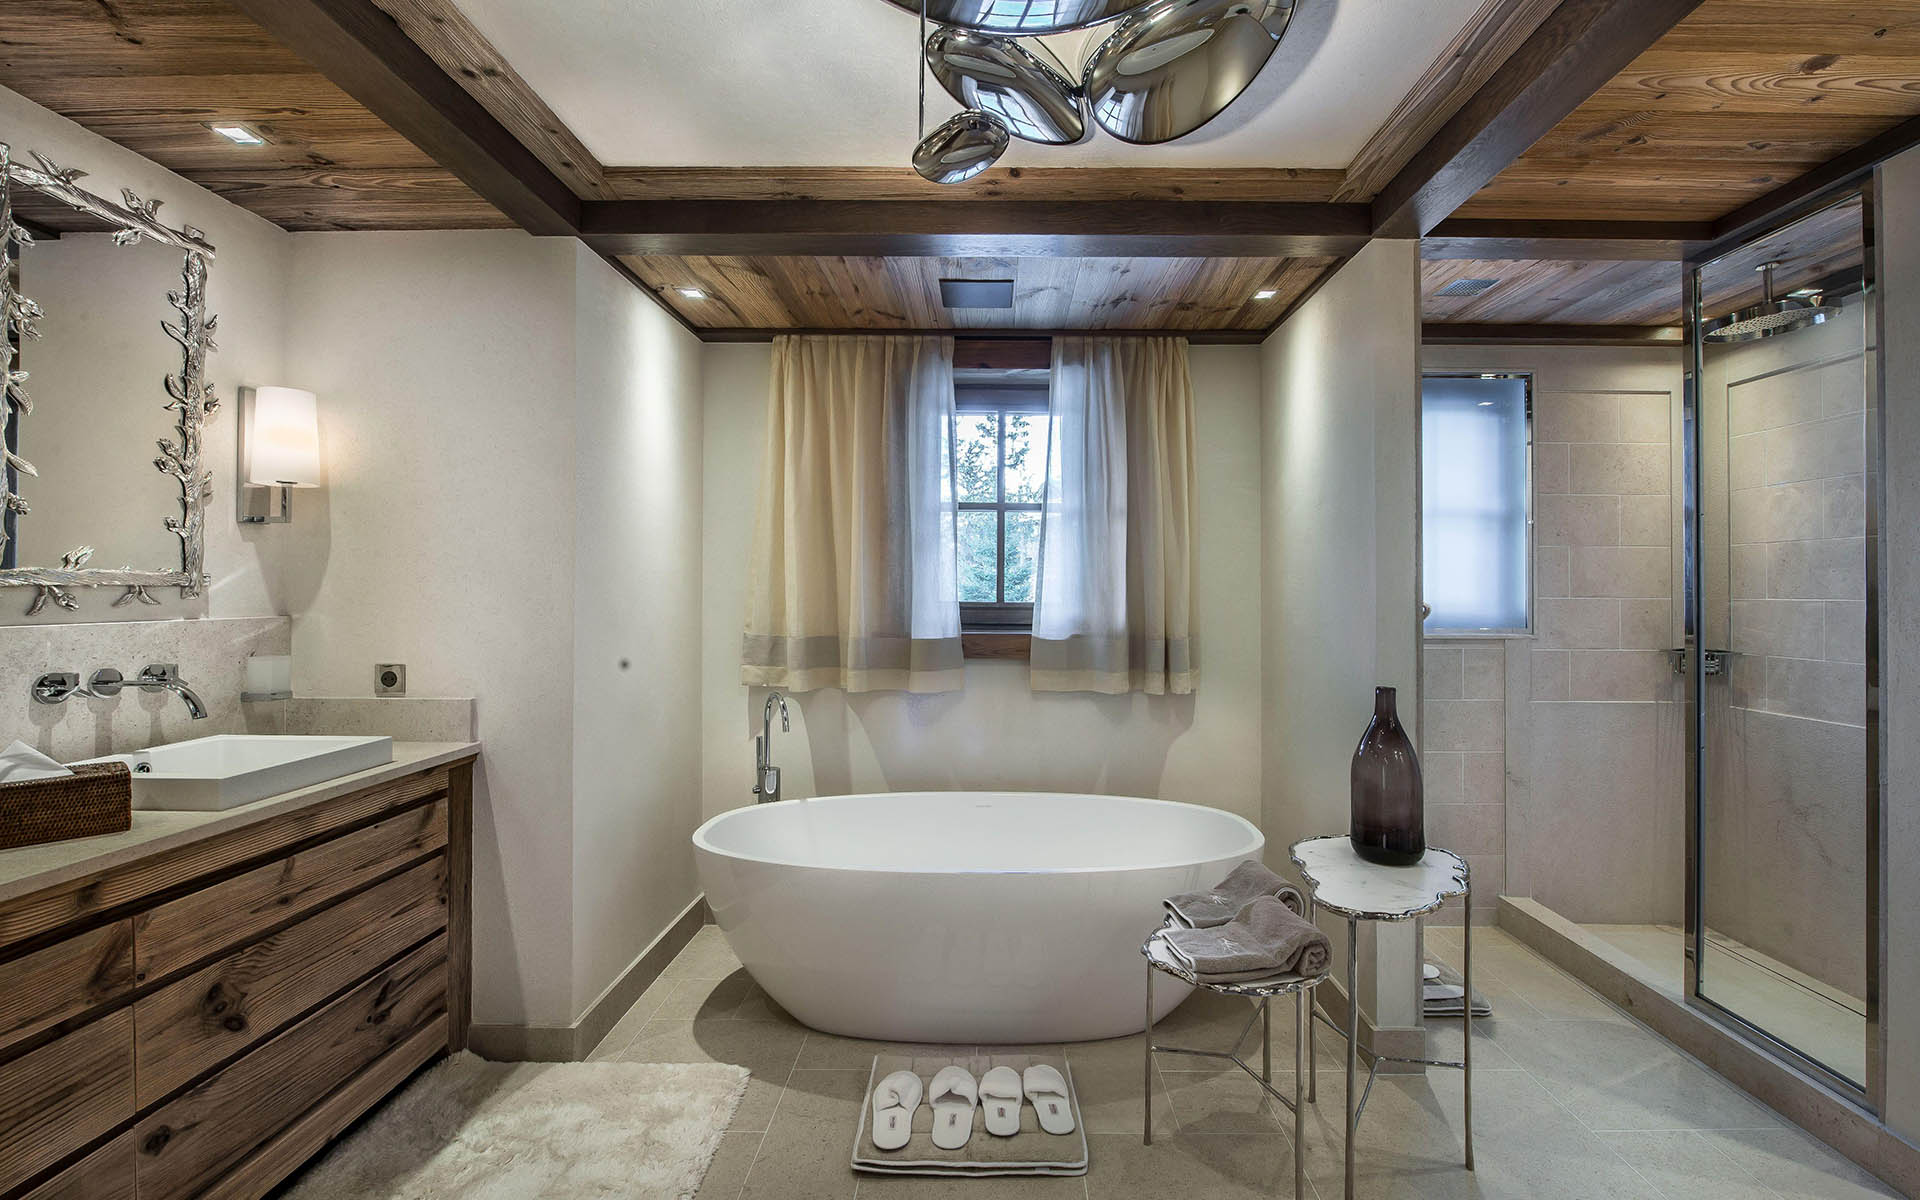 Chalet Cryst’Aile, Courchevel 1850